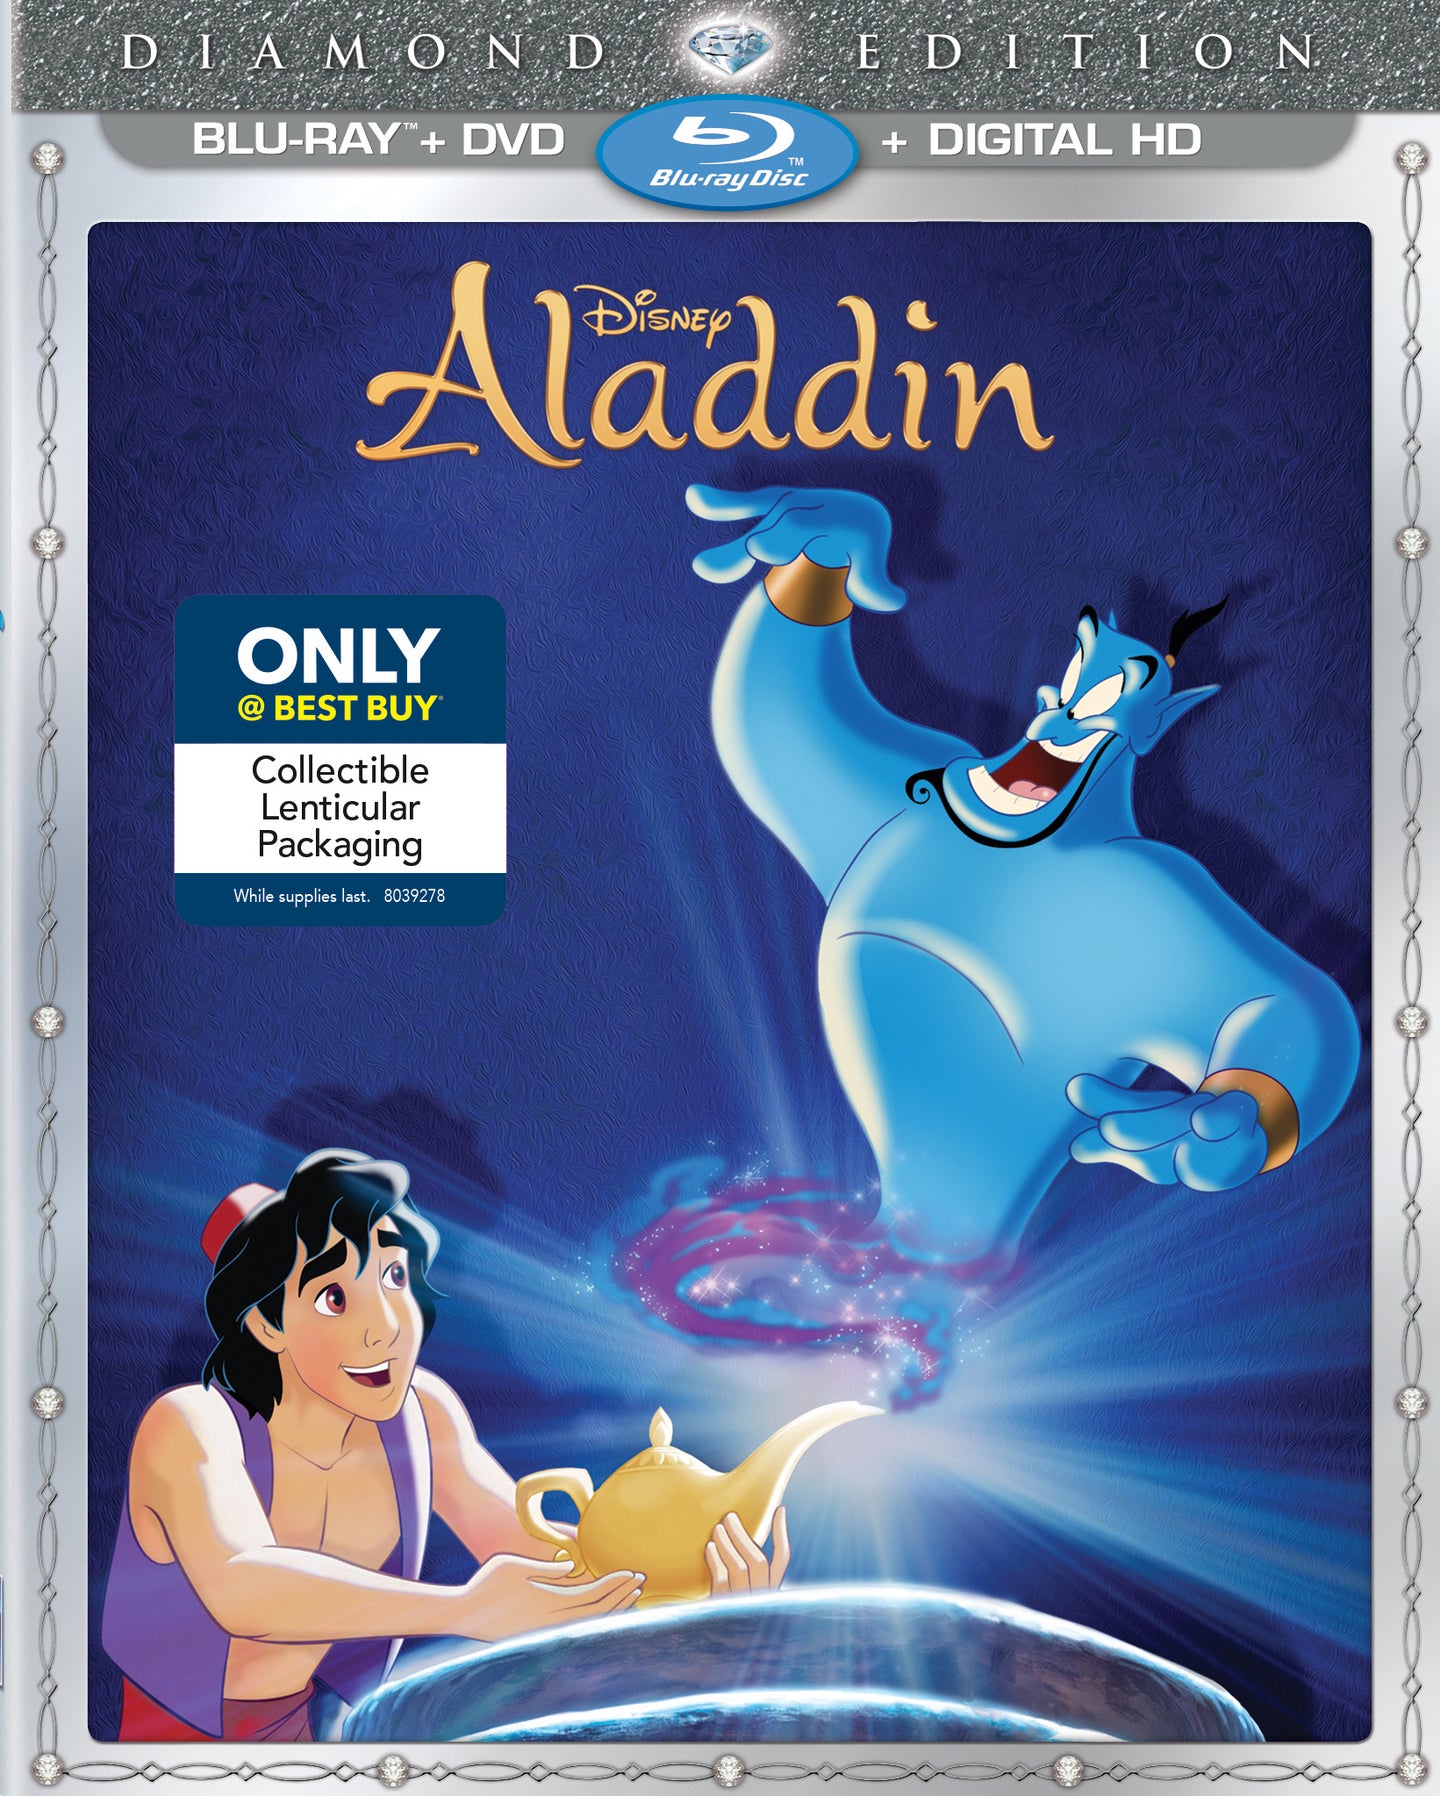 Aladdin: Diamond Edition (1992) Vudu or Movies Anywhere HD redemption only